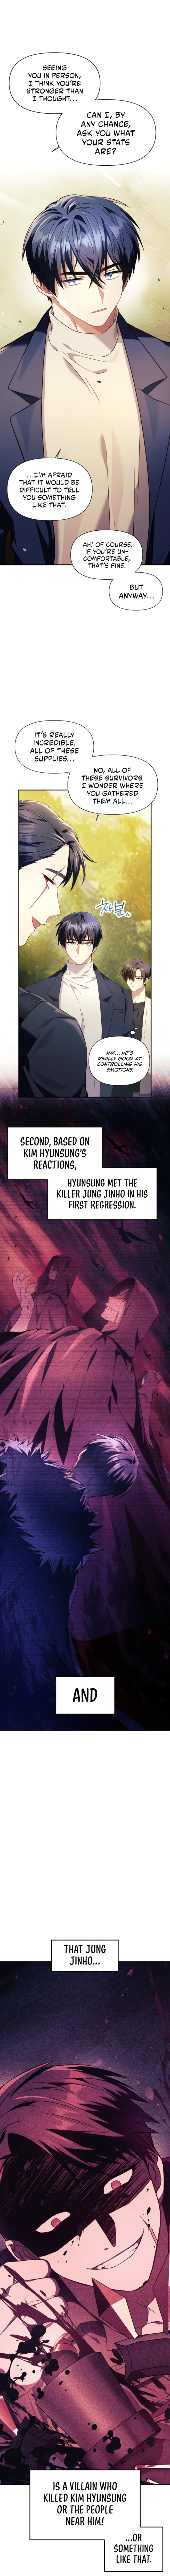 Regressor Instruction Manual - Chapter 18 Page 3